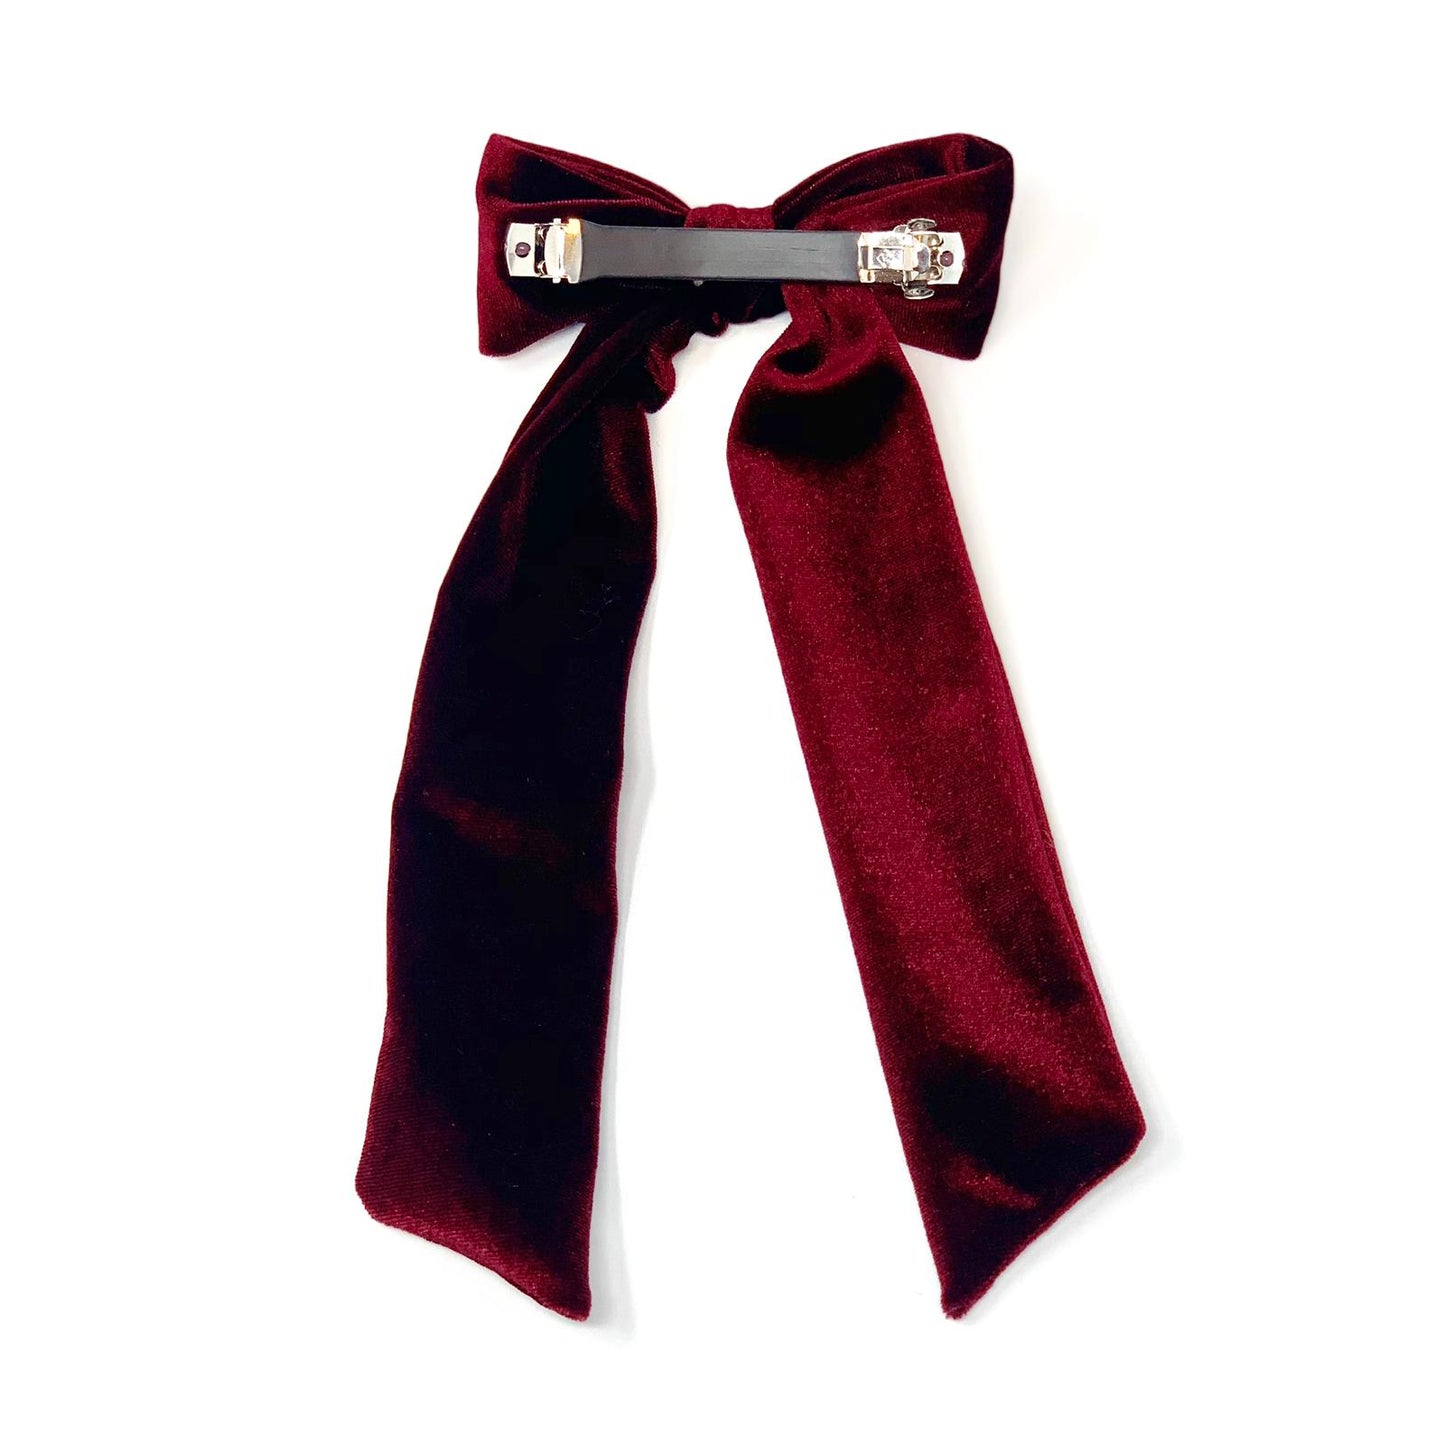 Hair clip with a long velvet bow in dark red color